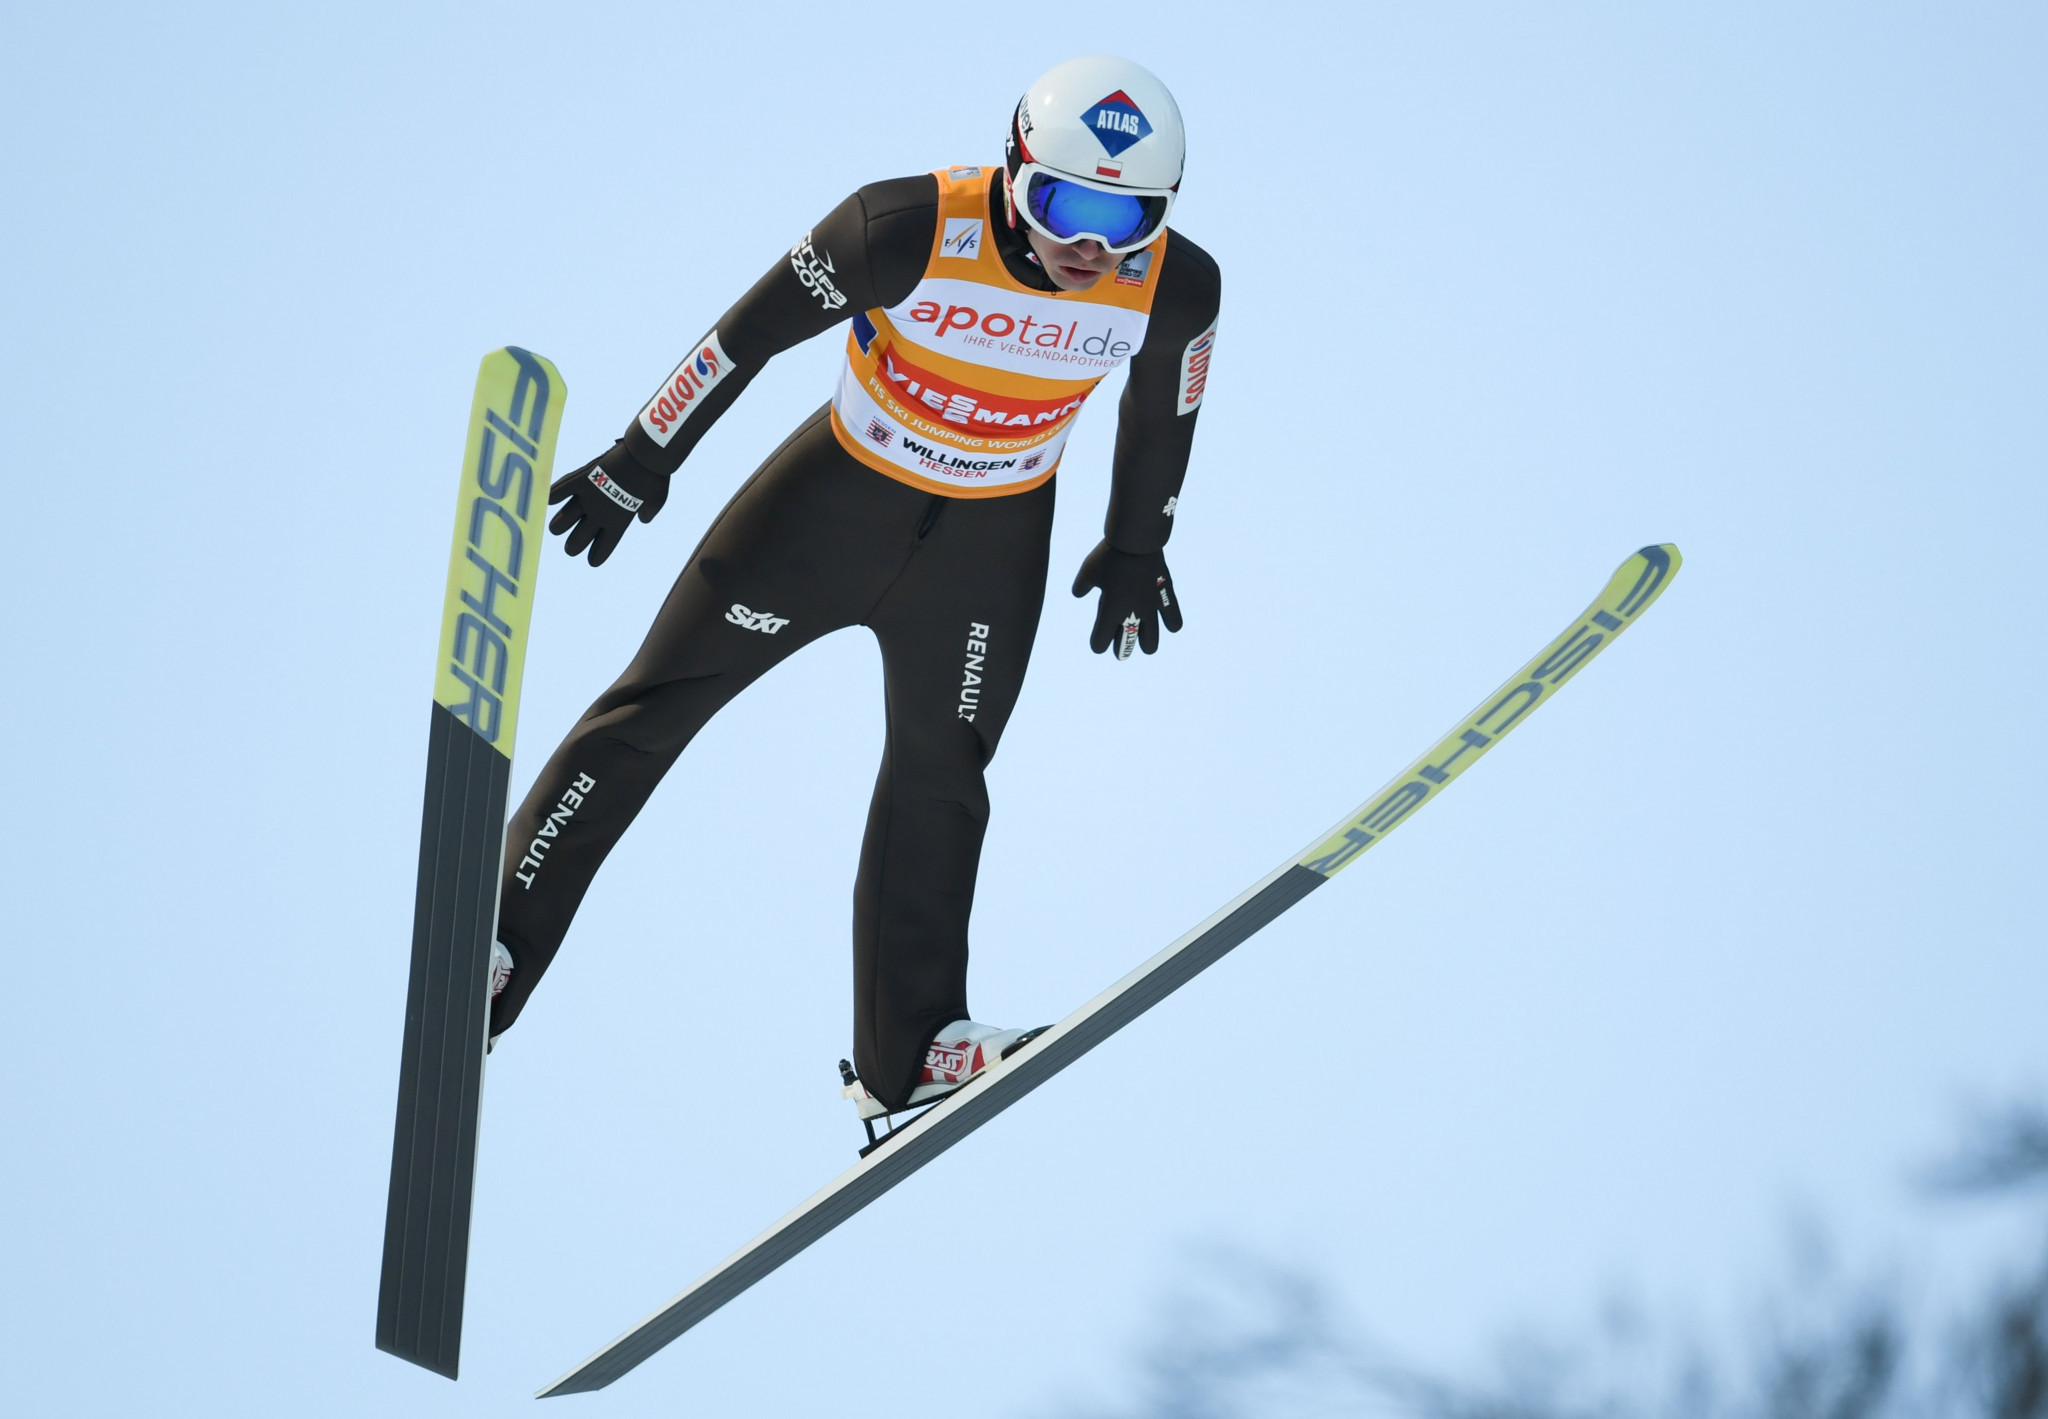 Poland triumph in team competition at FIS Ski Jumping World Cup in Wellingen